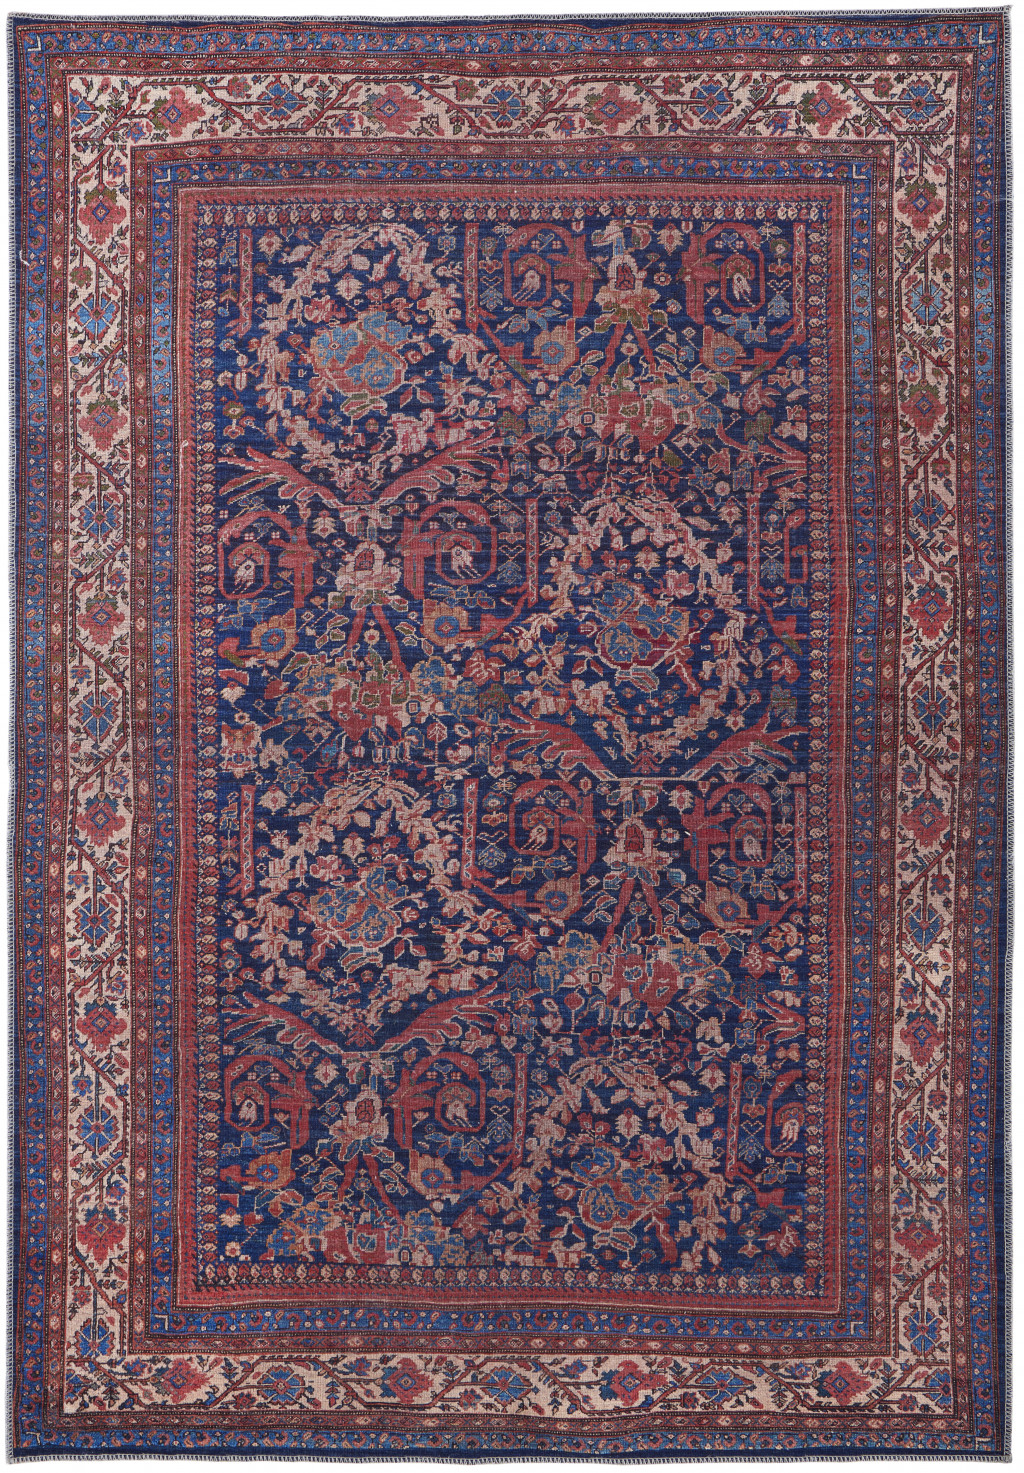 8' X 10' Red Blue And Tan Floral Power Loom Area Rug-515107-1